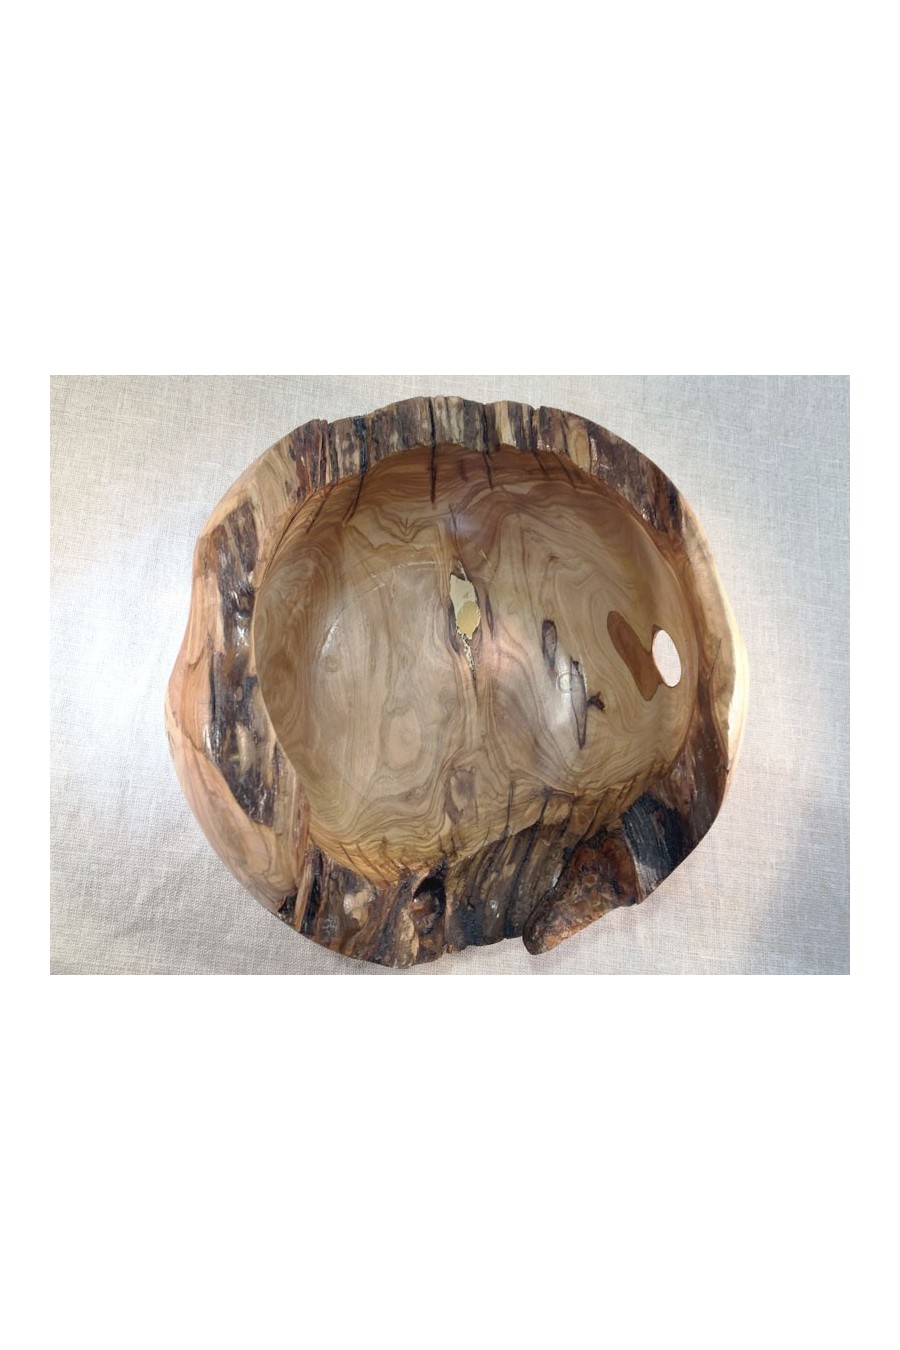 Catchall bowl in olive wood